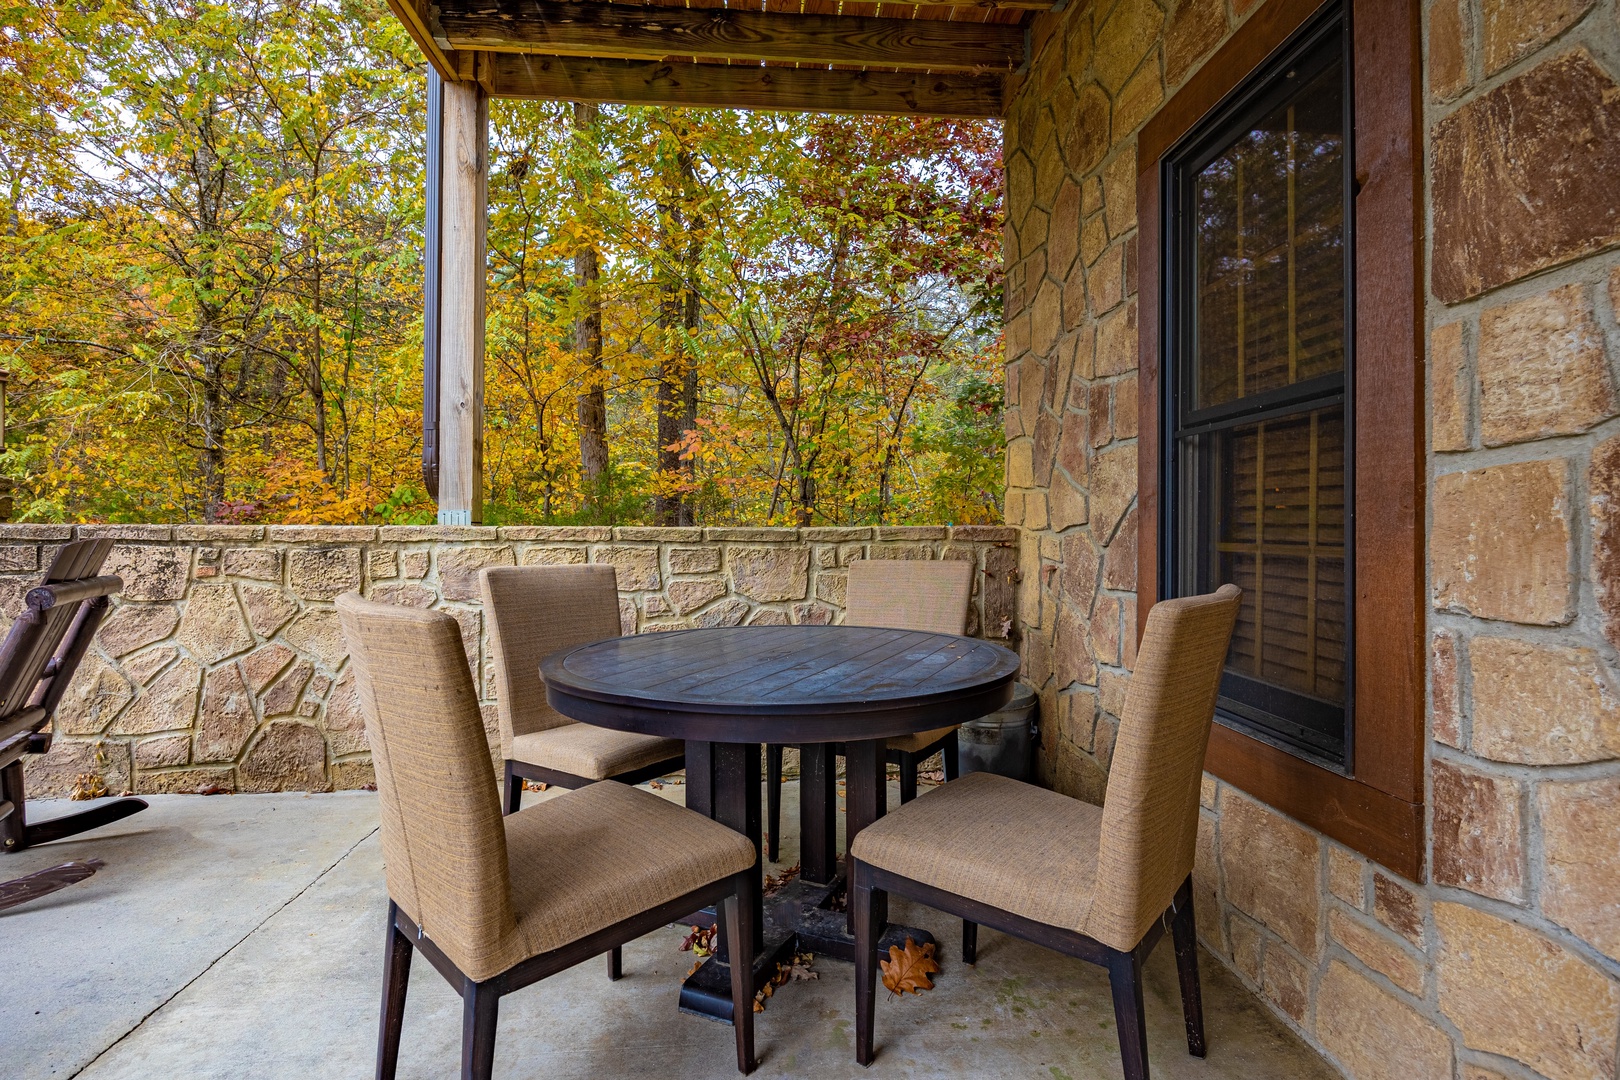 Outdoor dining for 4 at Mountain Lake Getaway, a 3 bedroom cabin rental located in douglas lake